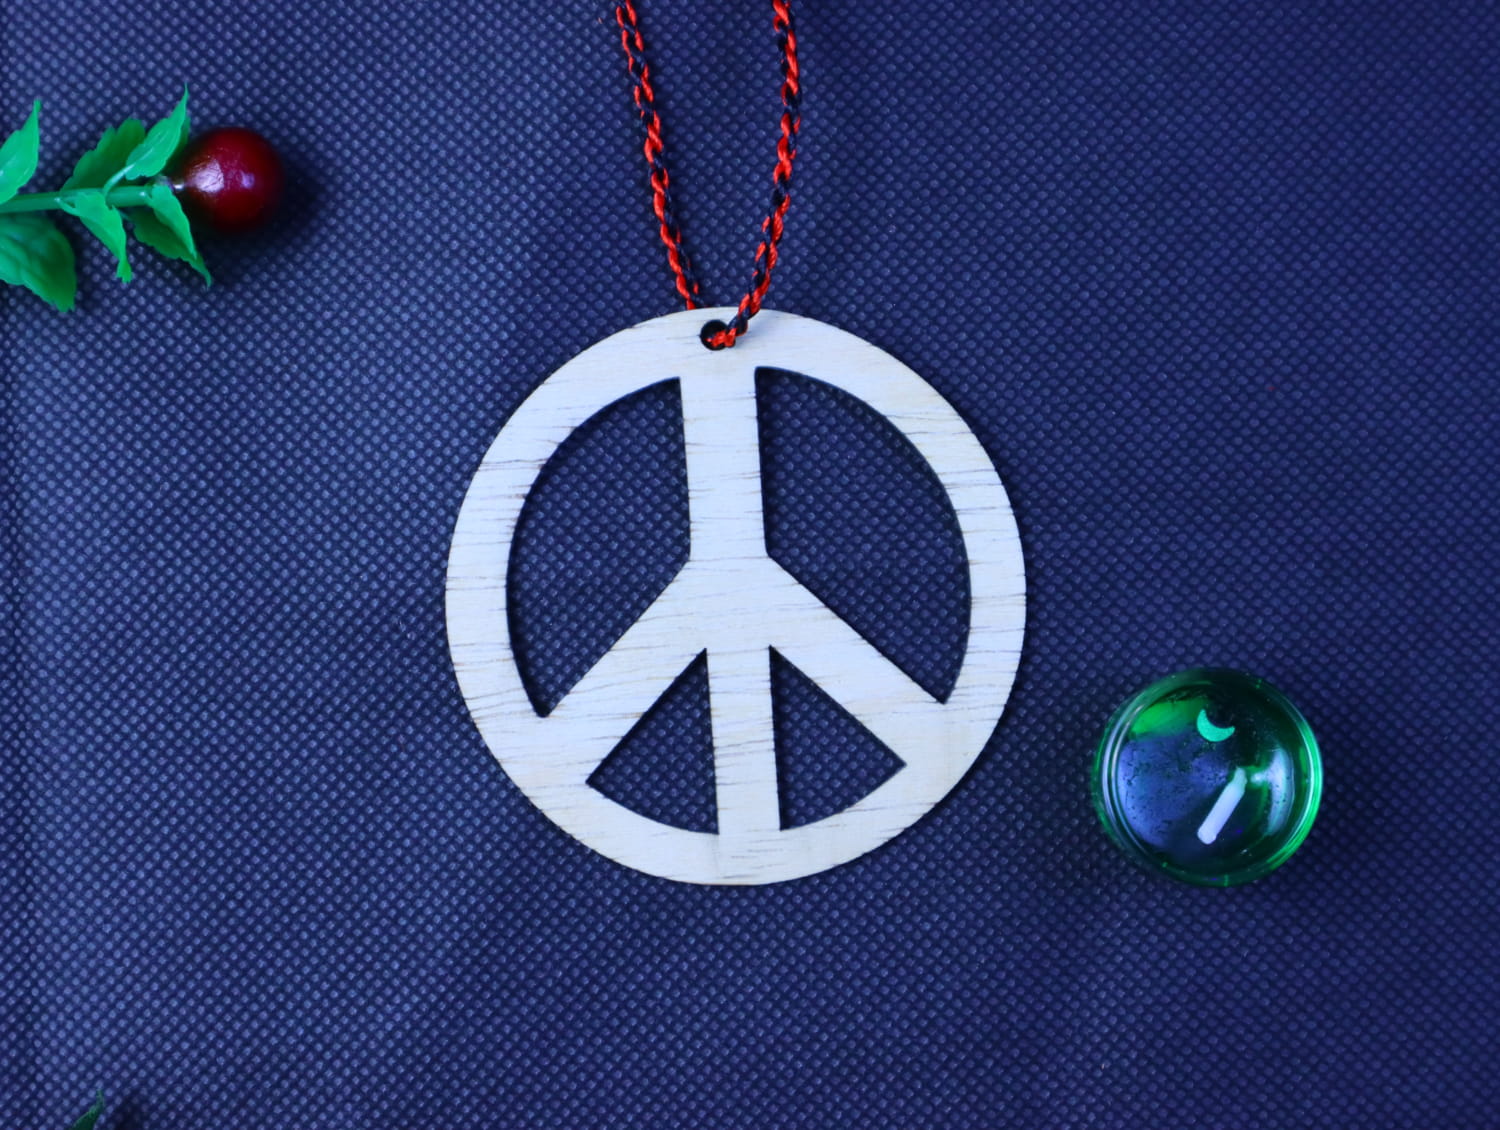 Laser Cut Peace Sign Christmas Ornament Free Vector